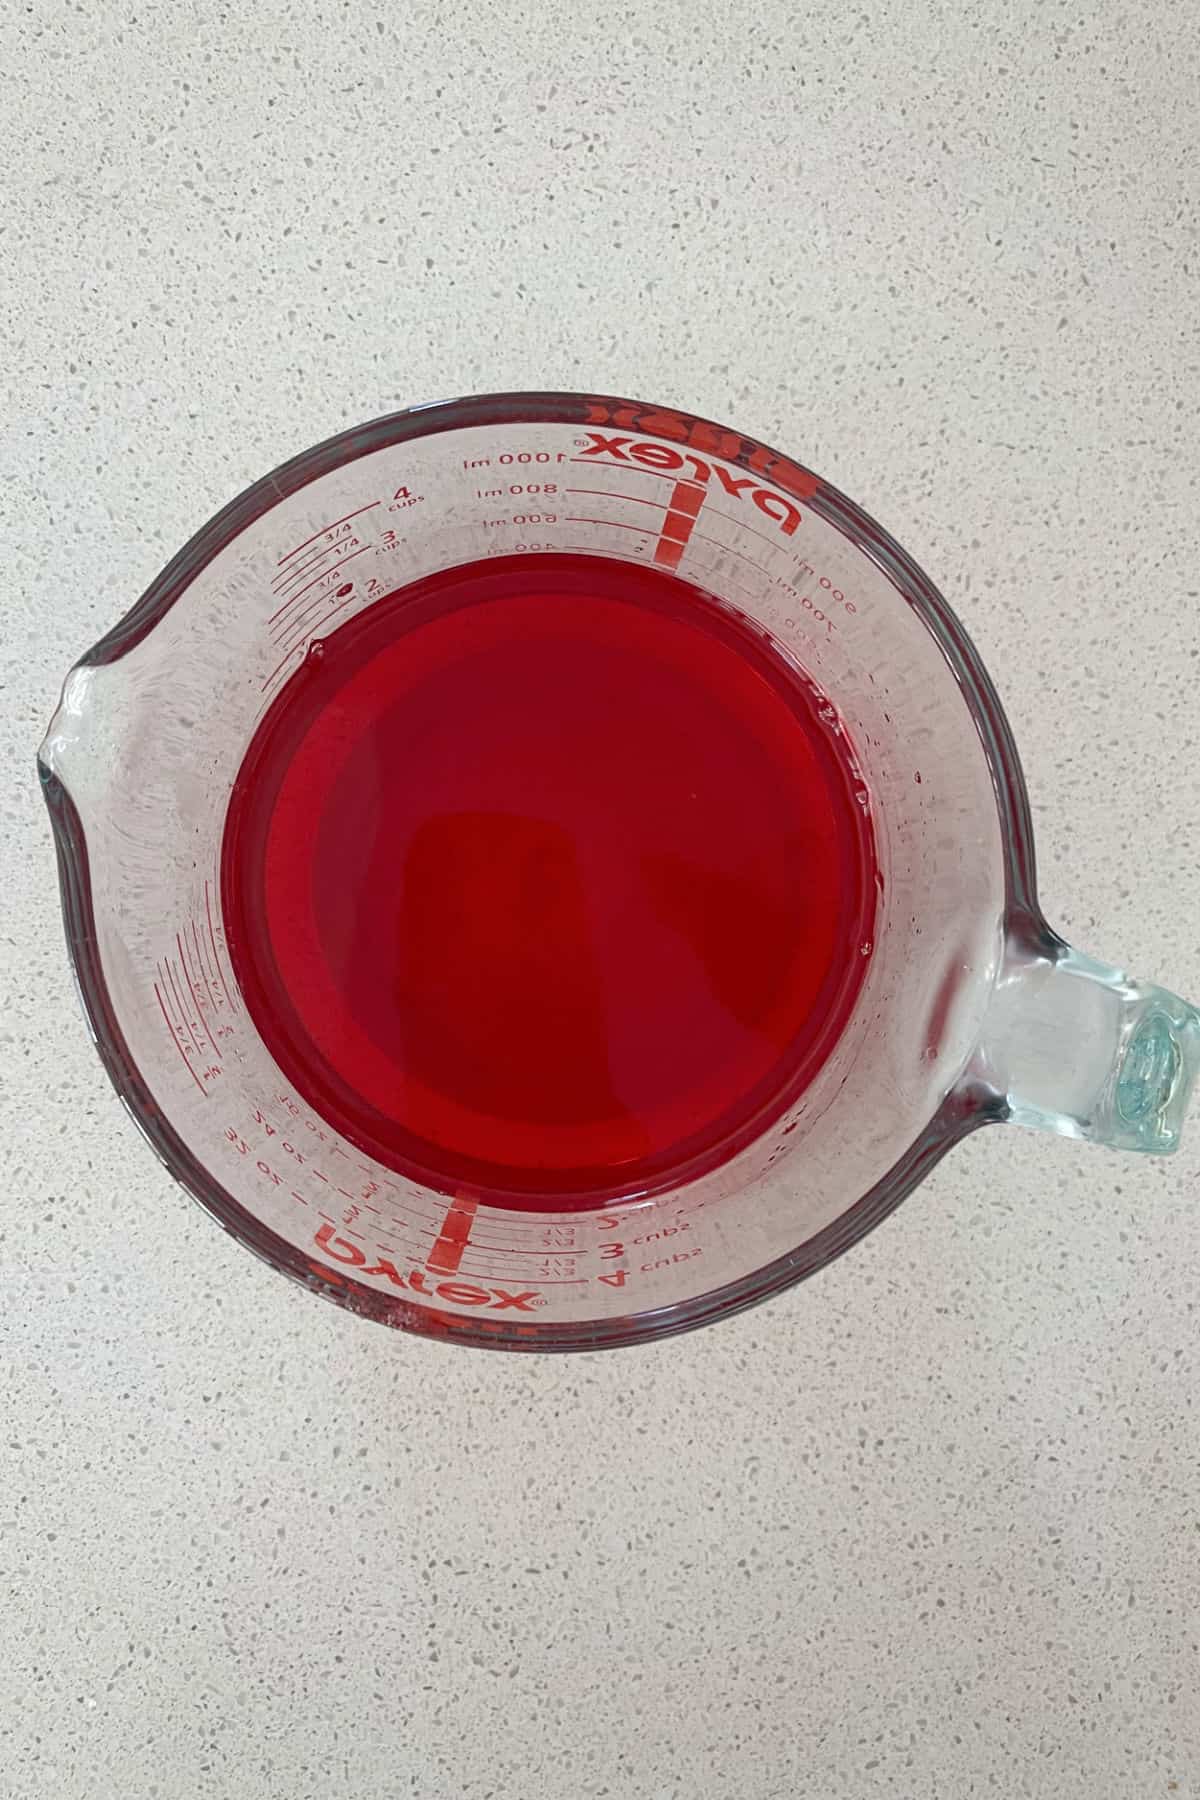 Strawberry jelly in a glass measuring jug.